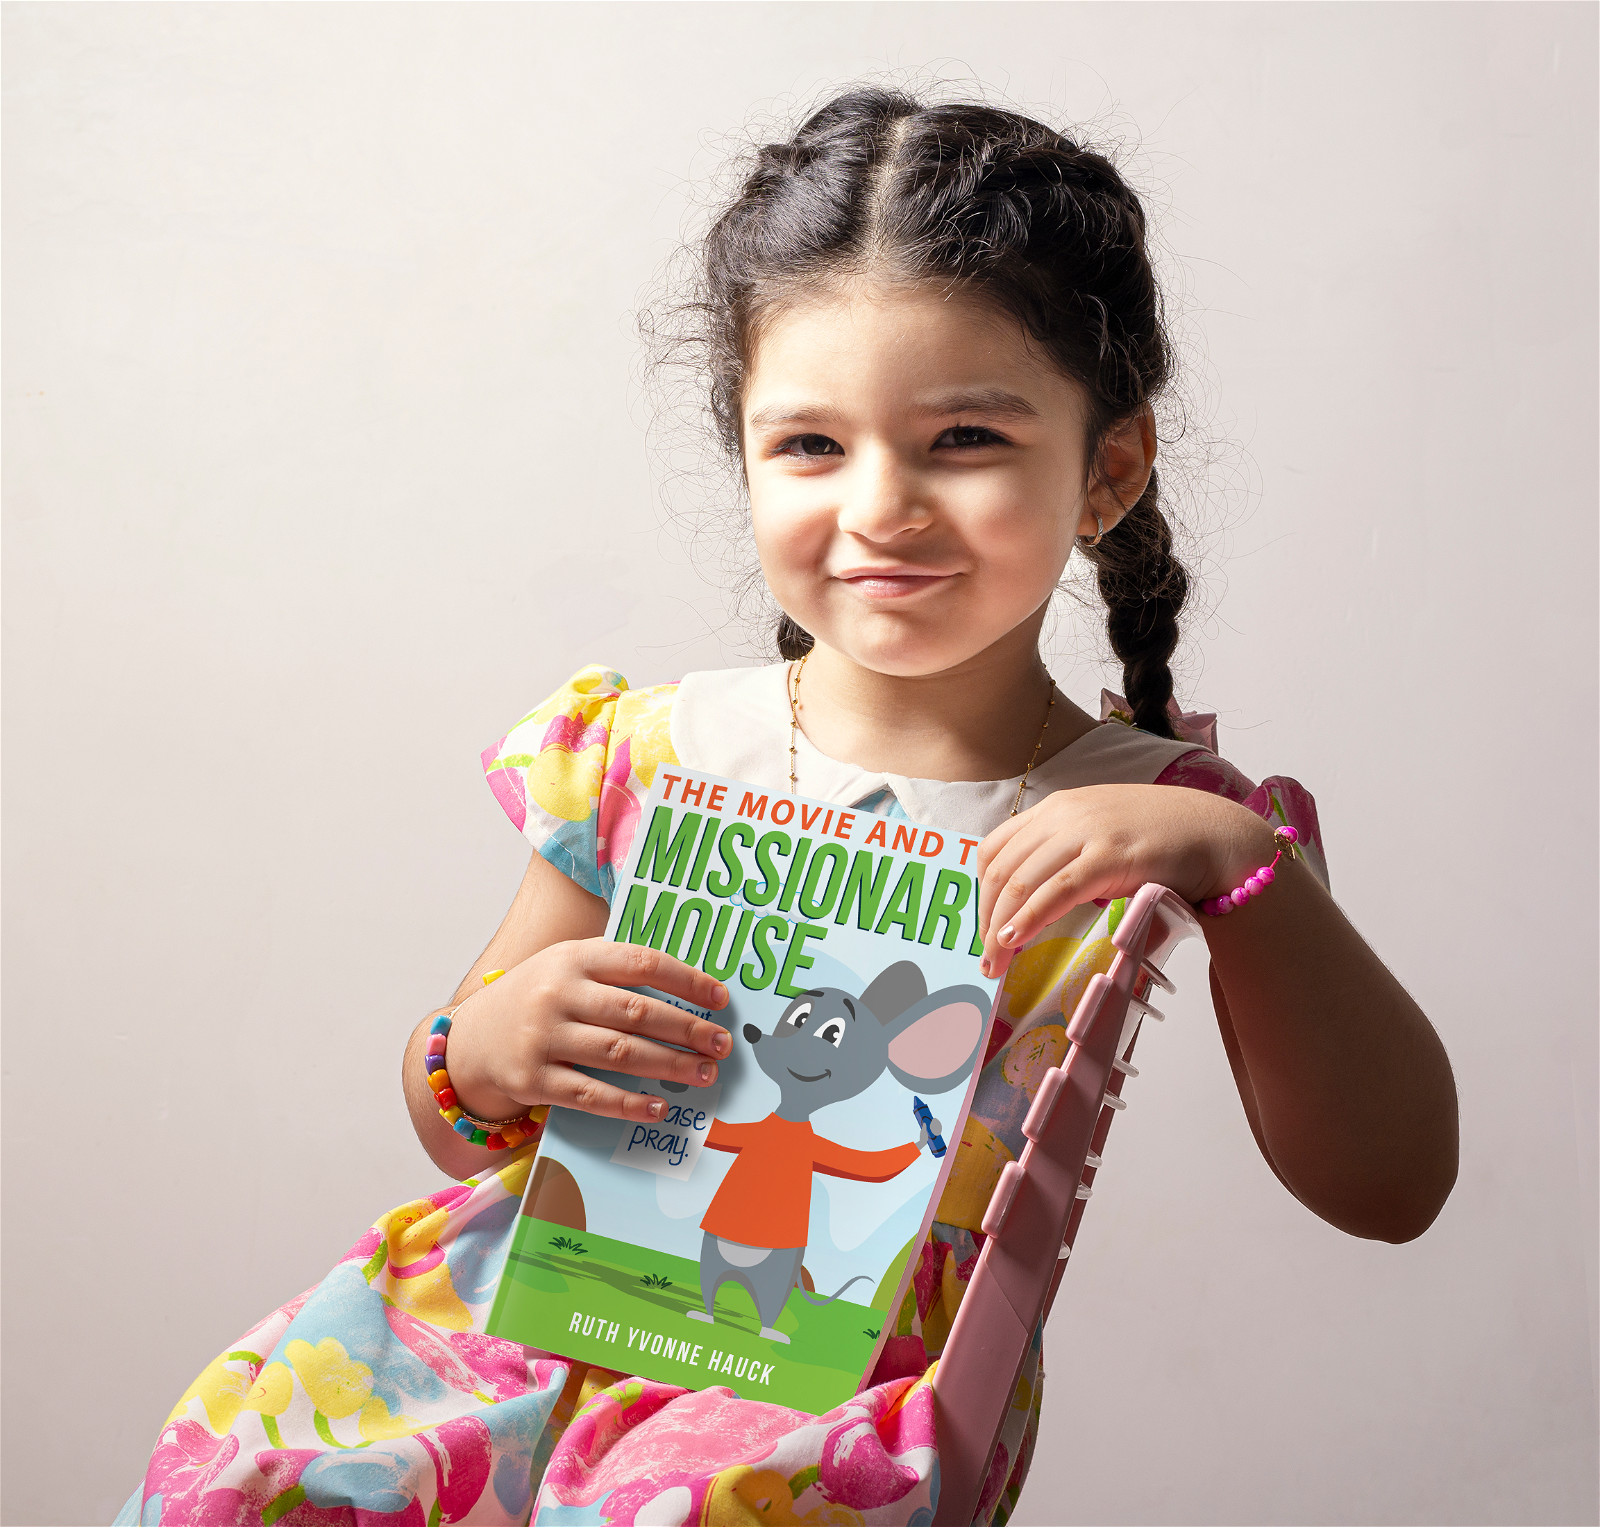 Missions book for kids!